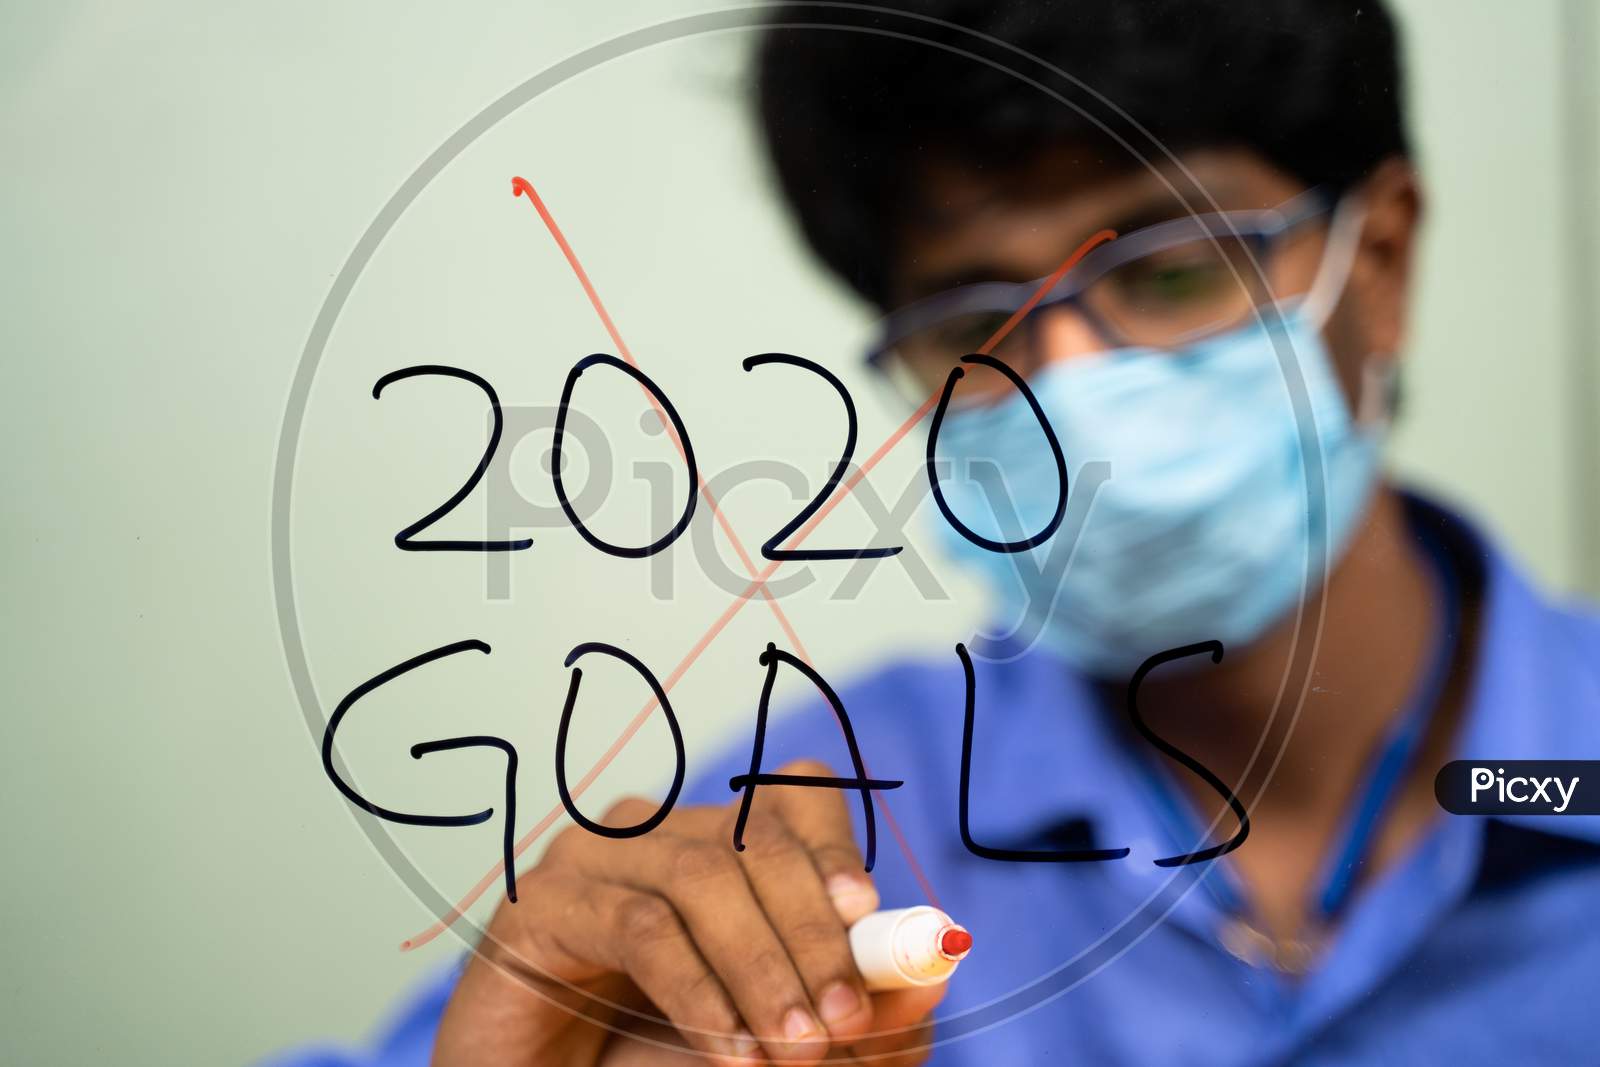 Young Man In Medical Mask Scratching Out 2020 Goals Due To Coronavirus Or Covid-19 Pandemic - Concept Of Failed 2020 Goals.